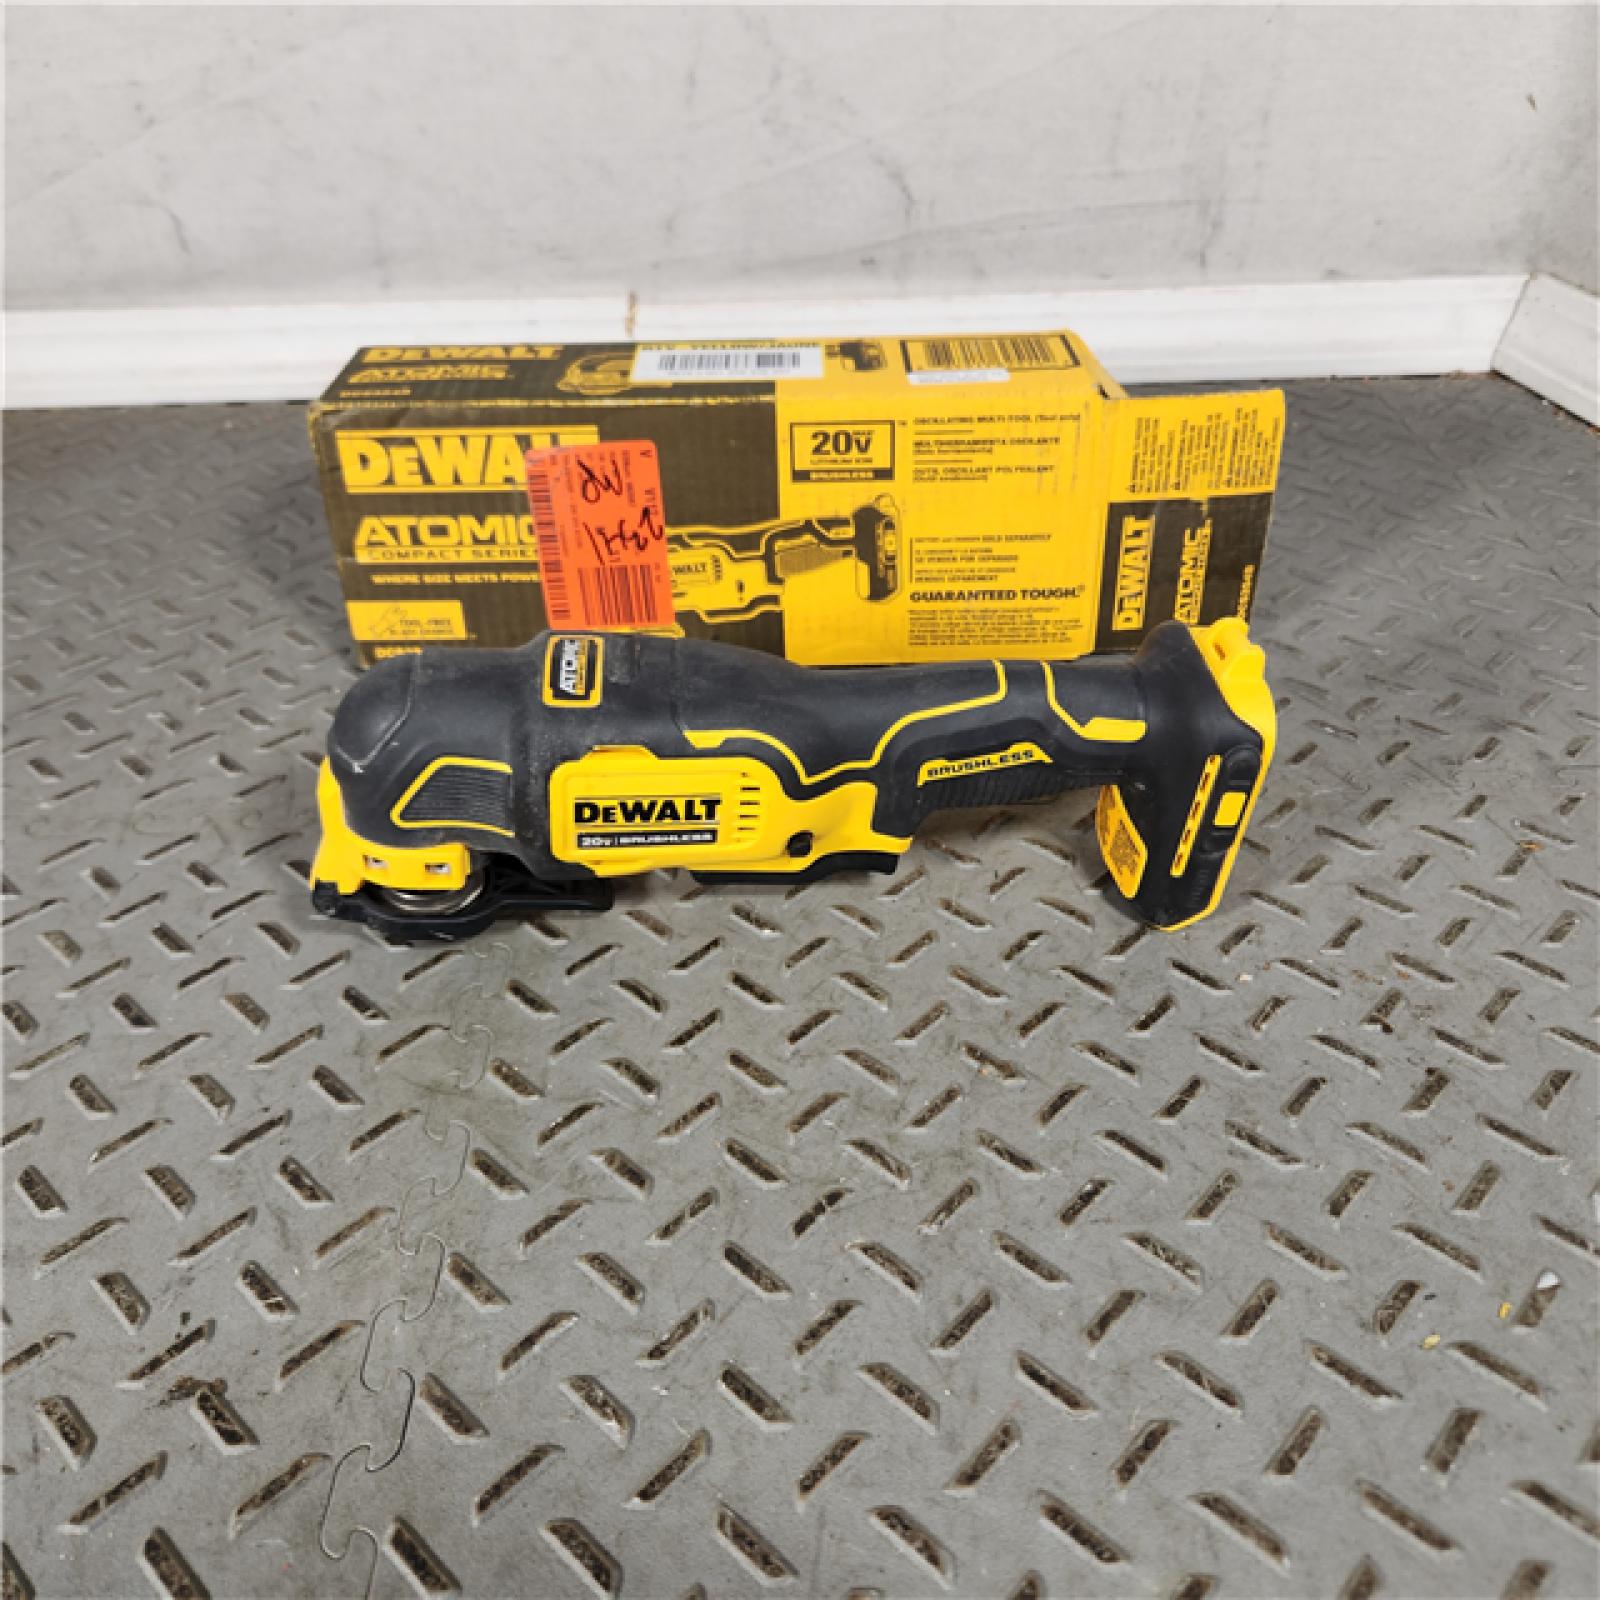 Huston Location - As-IS DEWALT DCS354B 20V MAX ATOMIC Lithium-Ion Cordless Oscillating Multi-Tool (Tool Only) - Appears IN LIKE NEW Condition